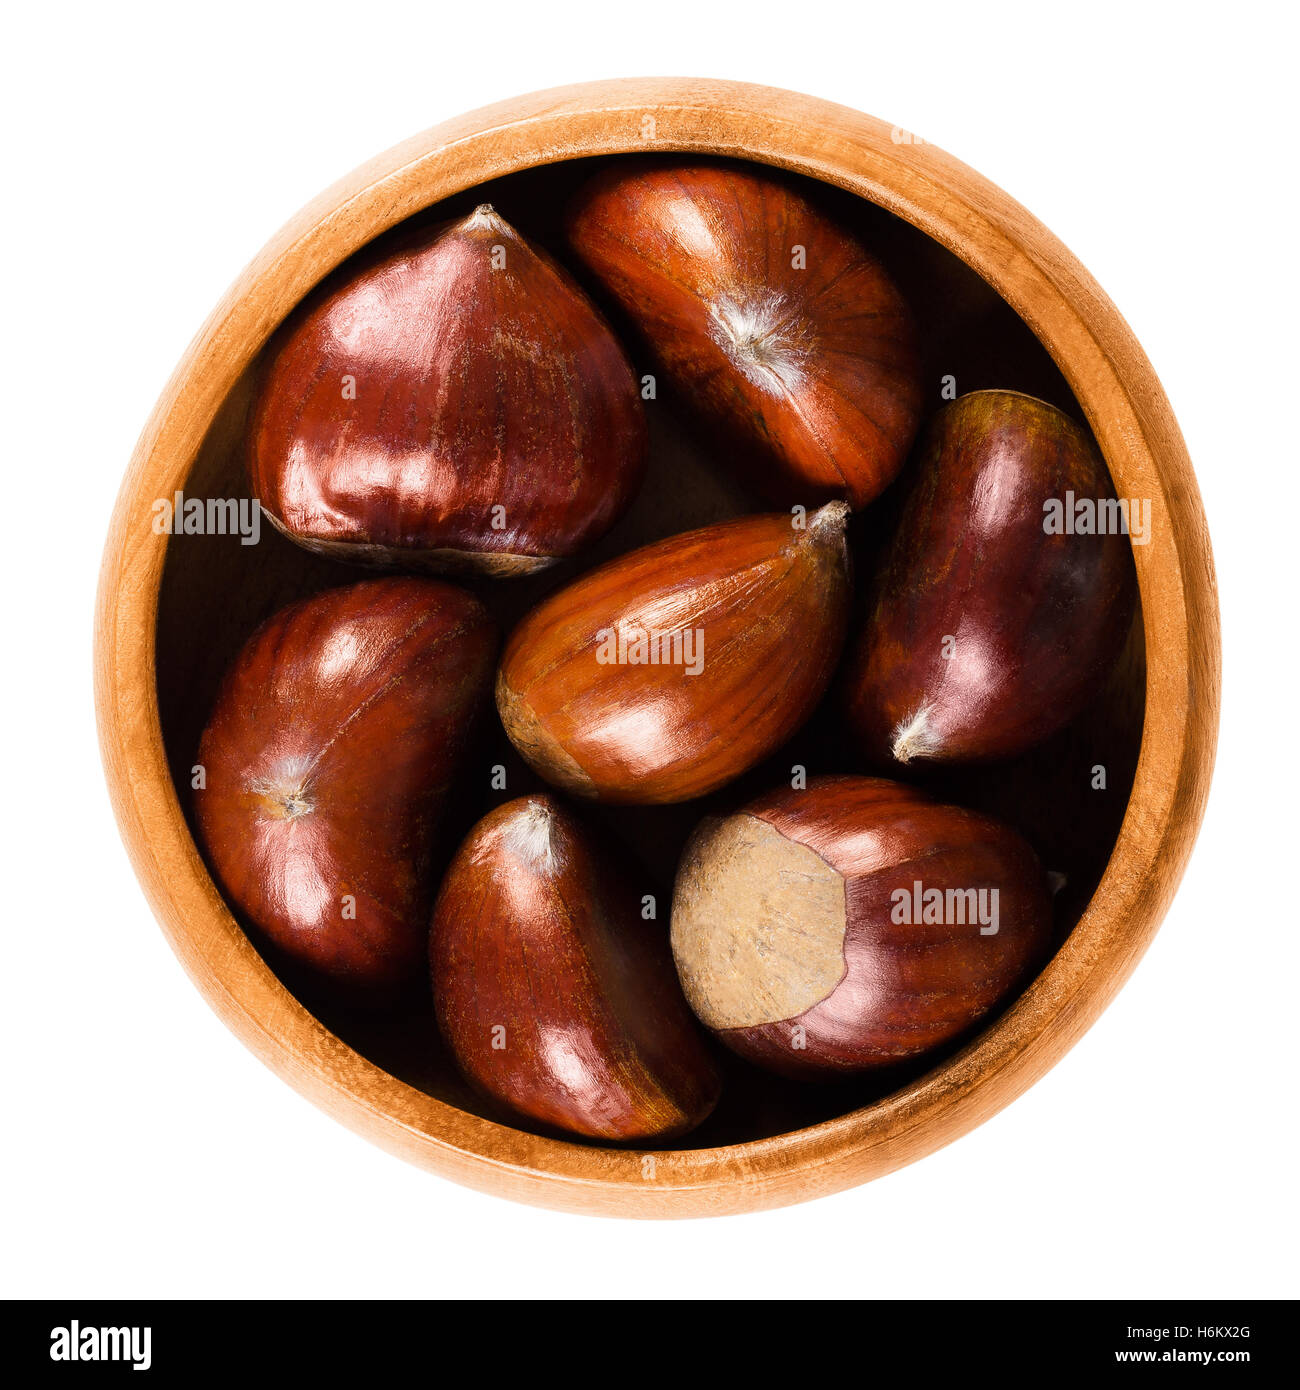 Sweet chestnuts in wooden bowl on white background. Edible seeds or nuts of Castanea sativa, also called marron. Stock Photo